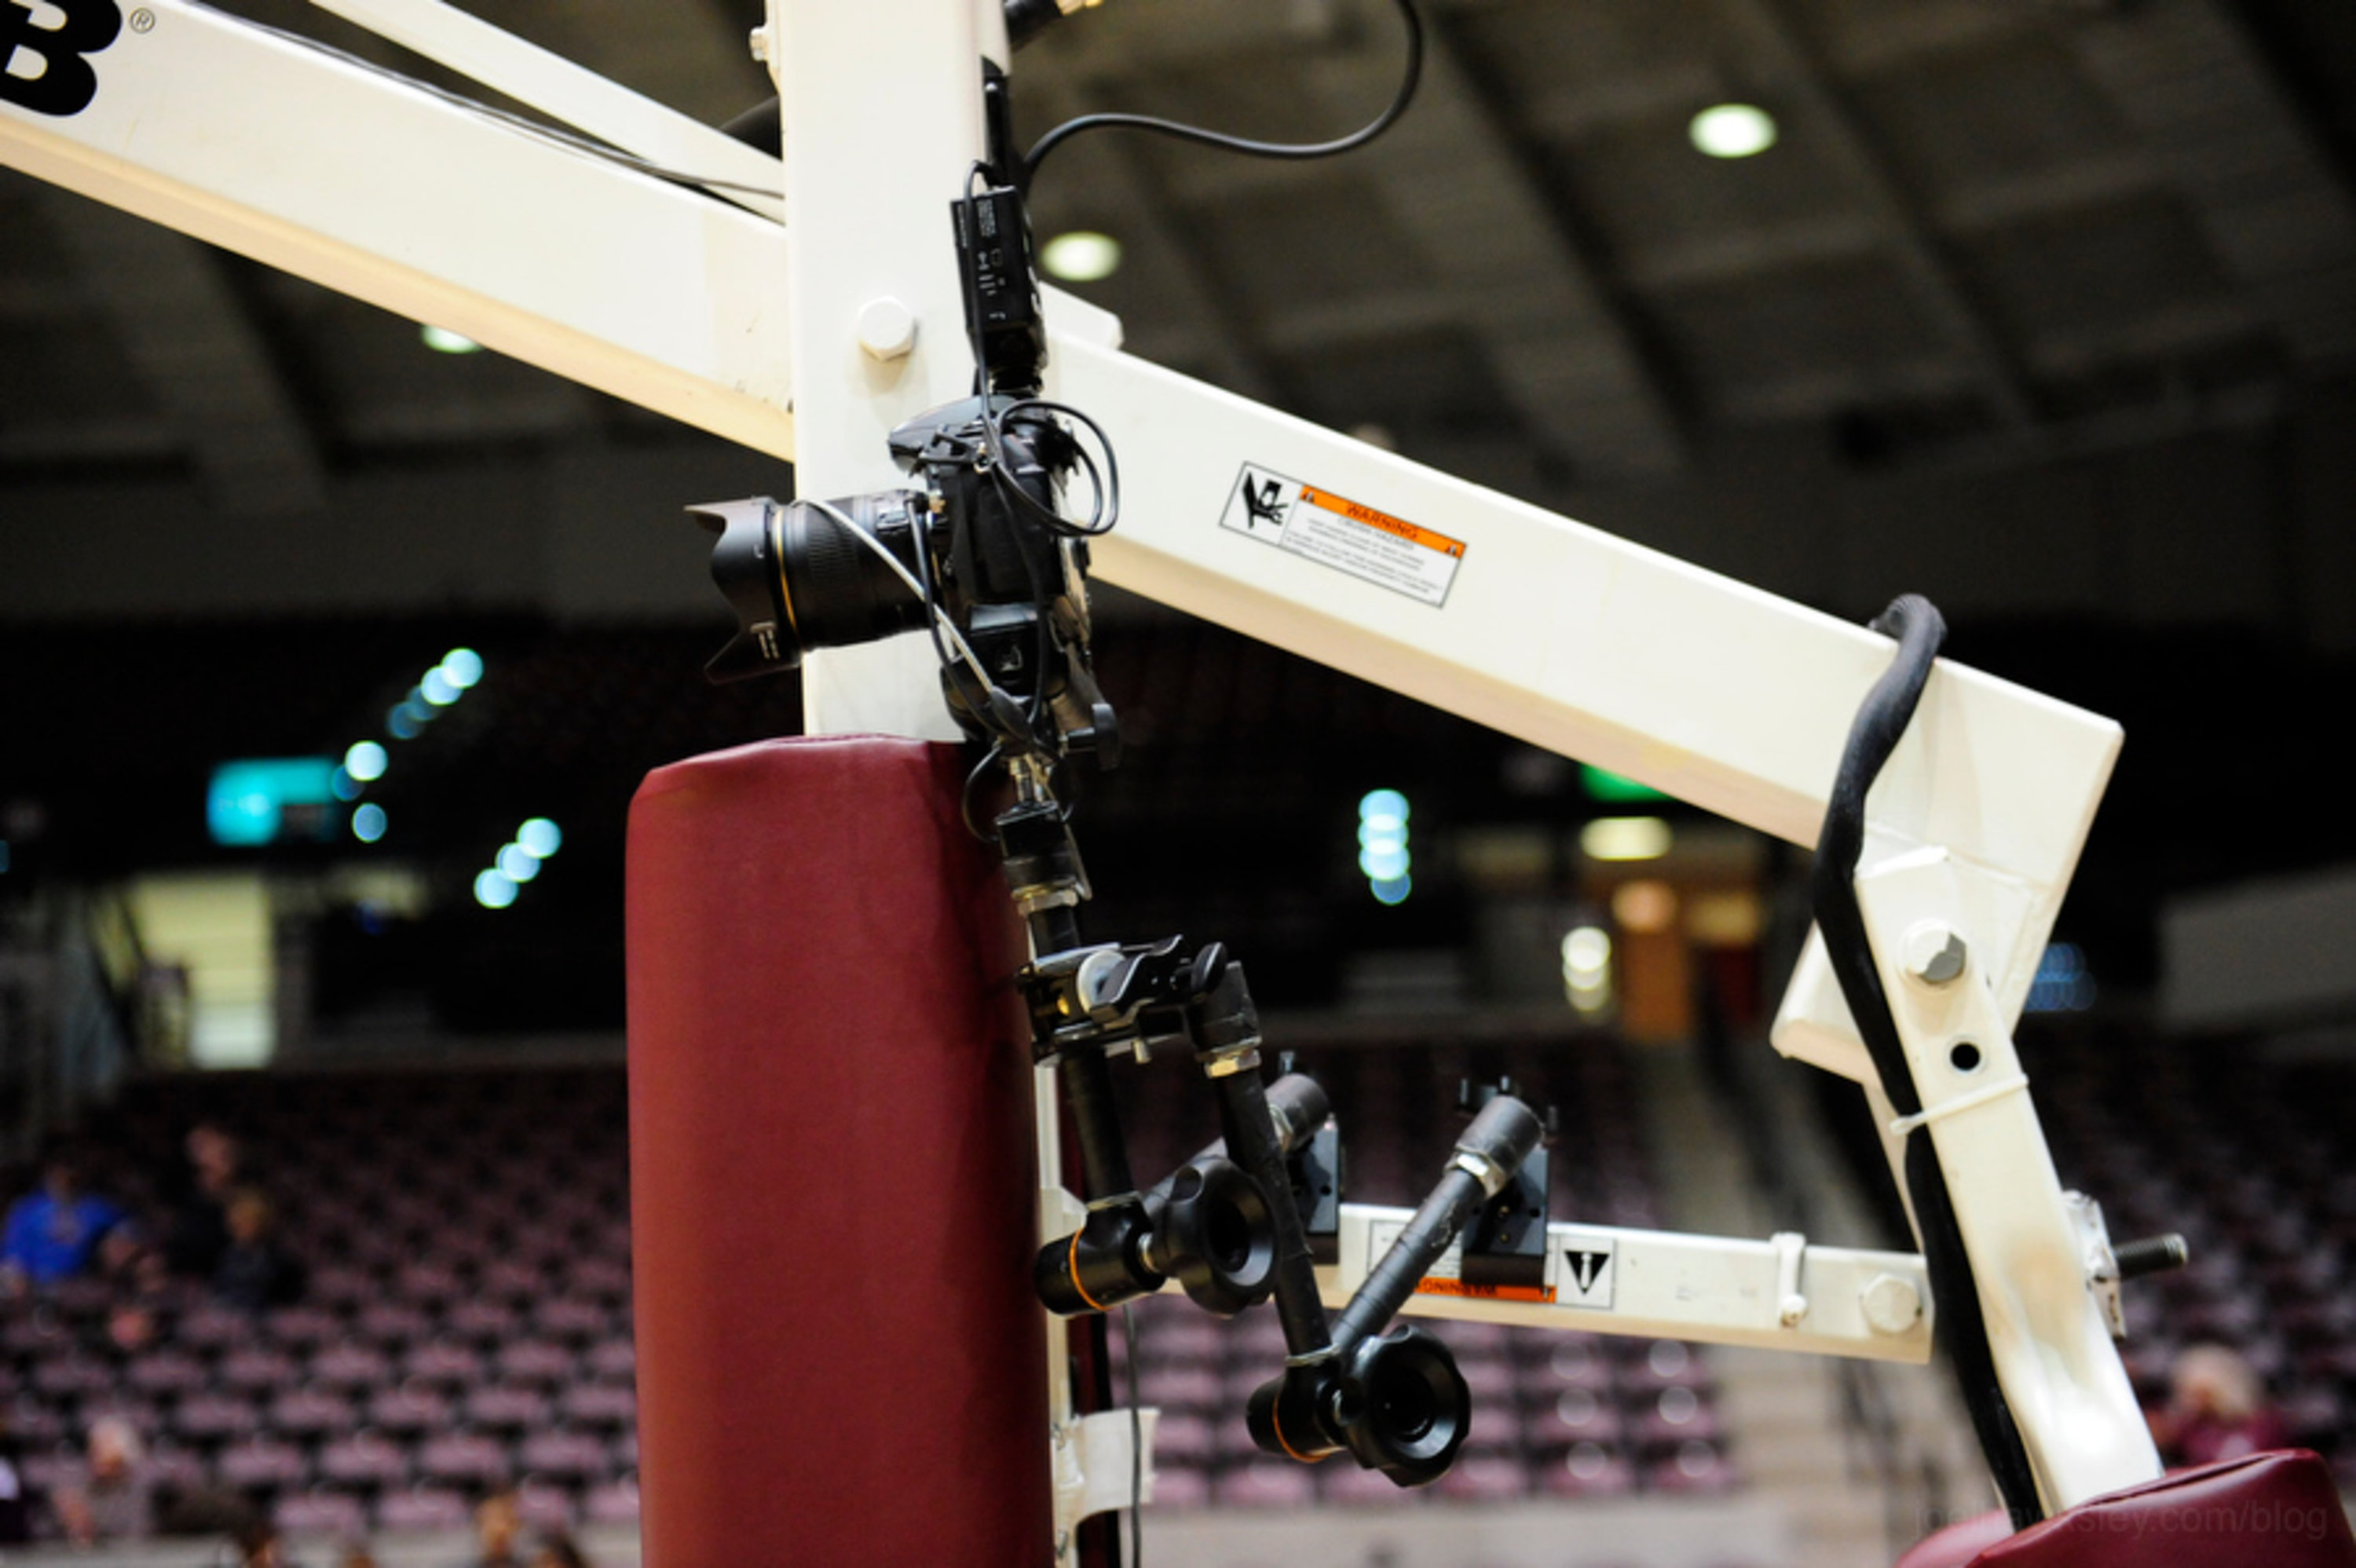 Nikon camera mounted to the post of a basketball hoop, viewed from the side